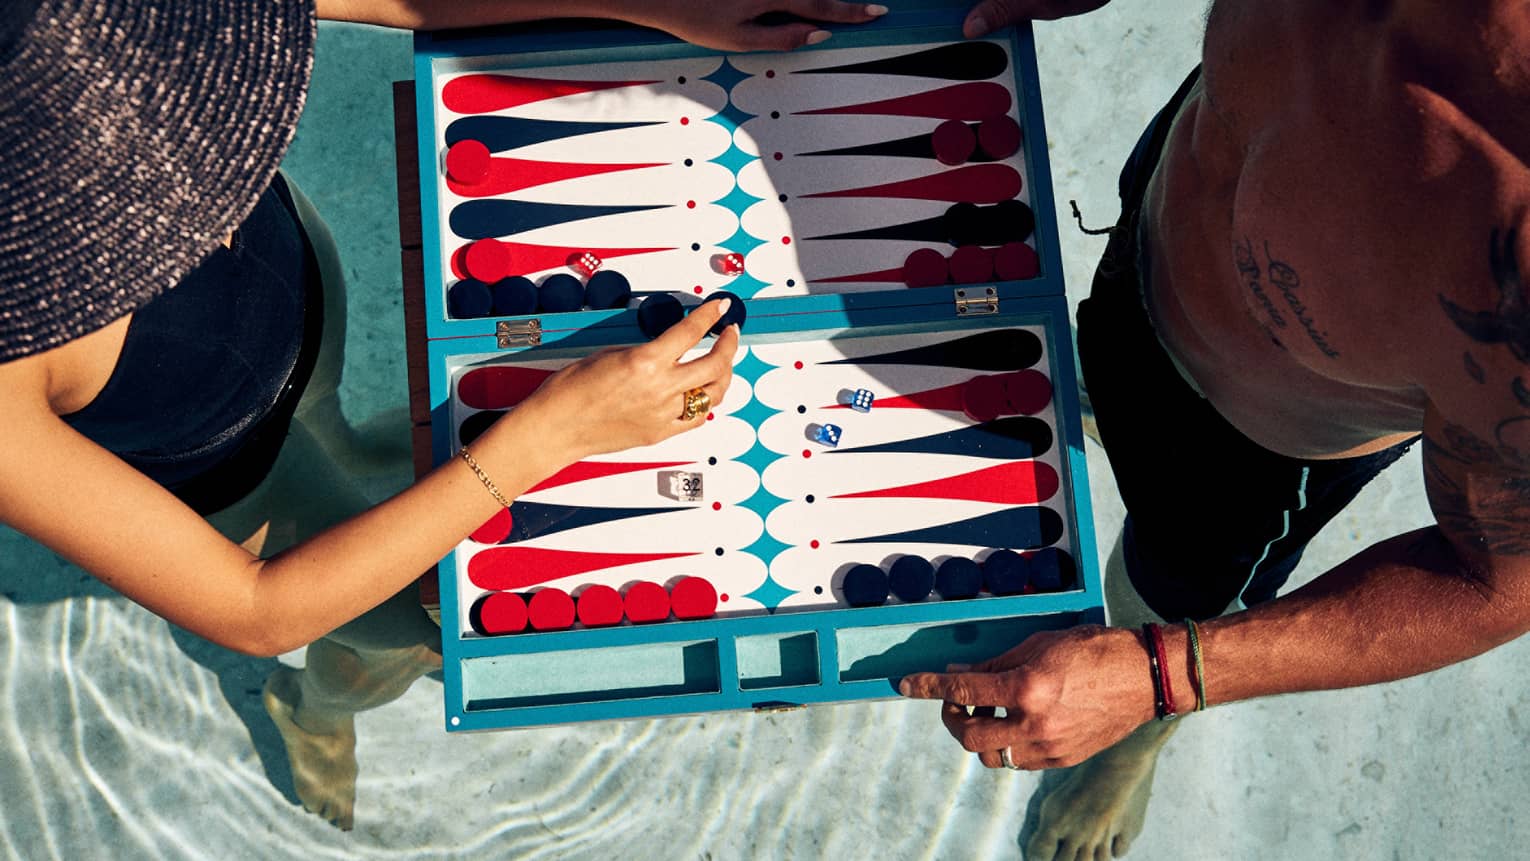 Aerial shot of man and woman in a pool, playing a floating game of backgammon